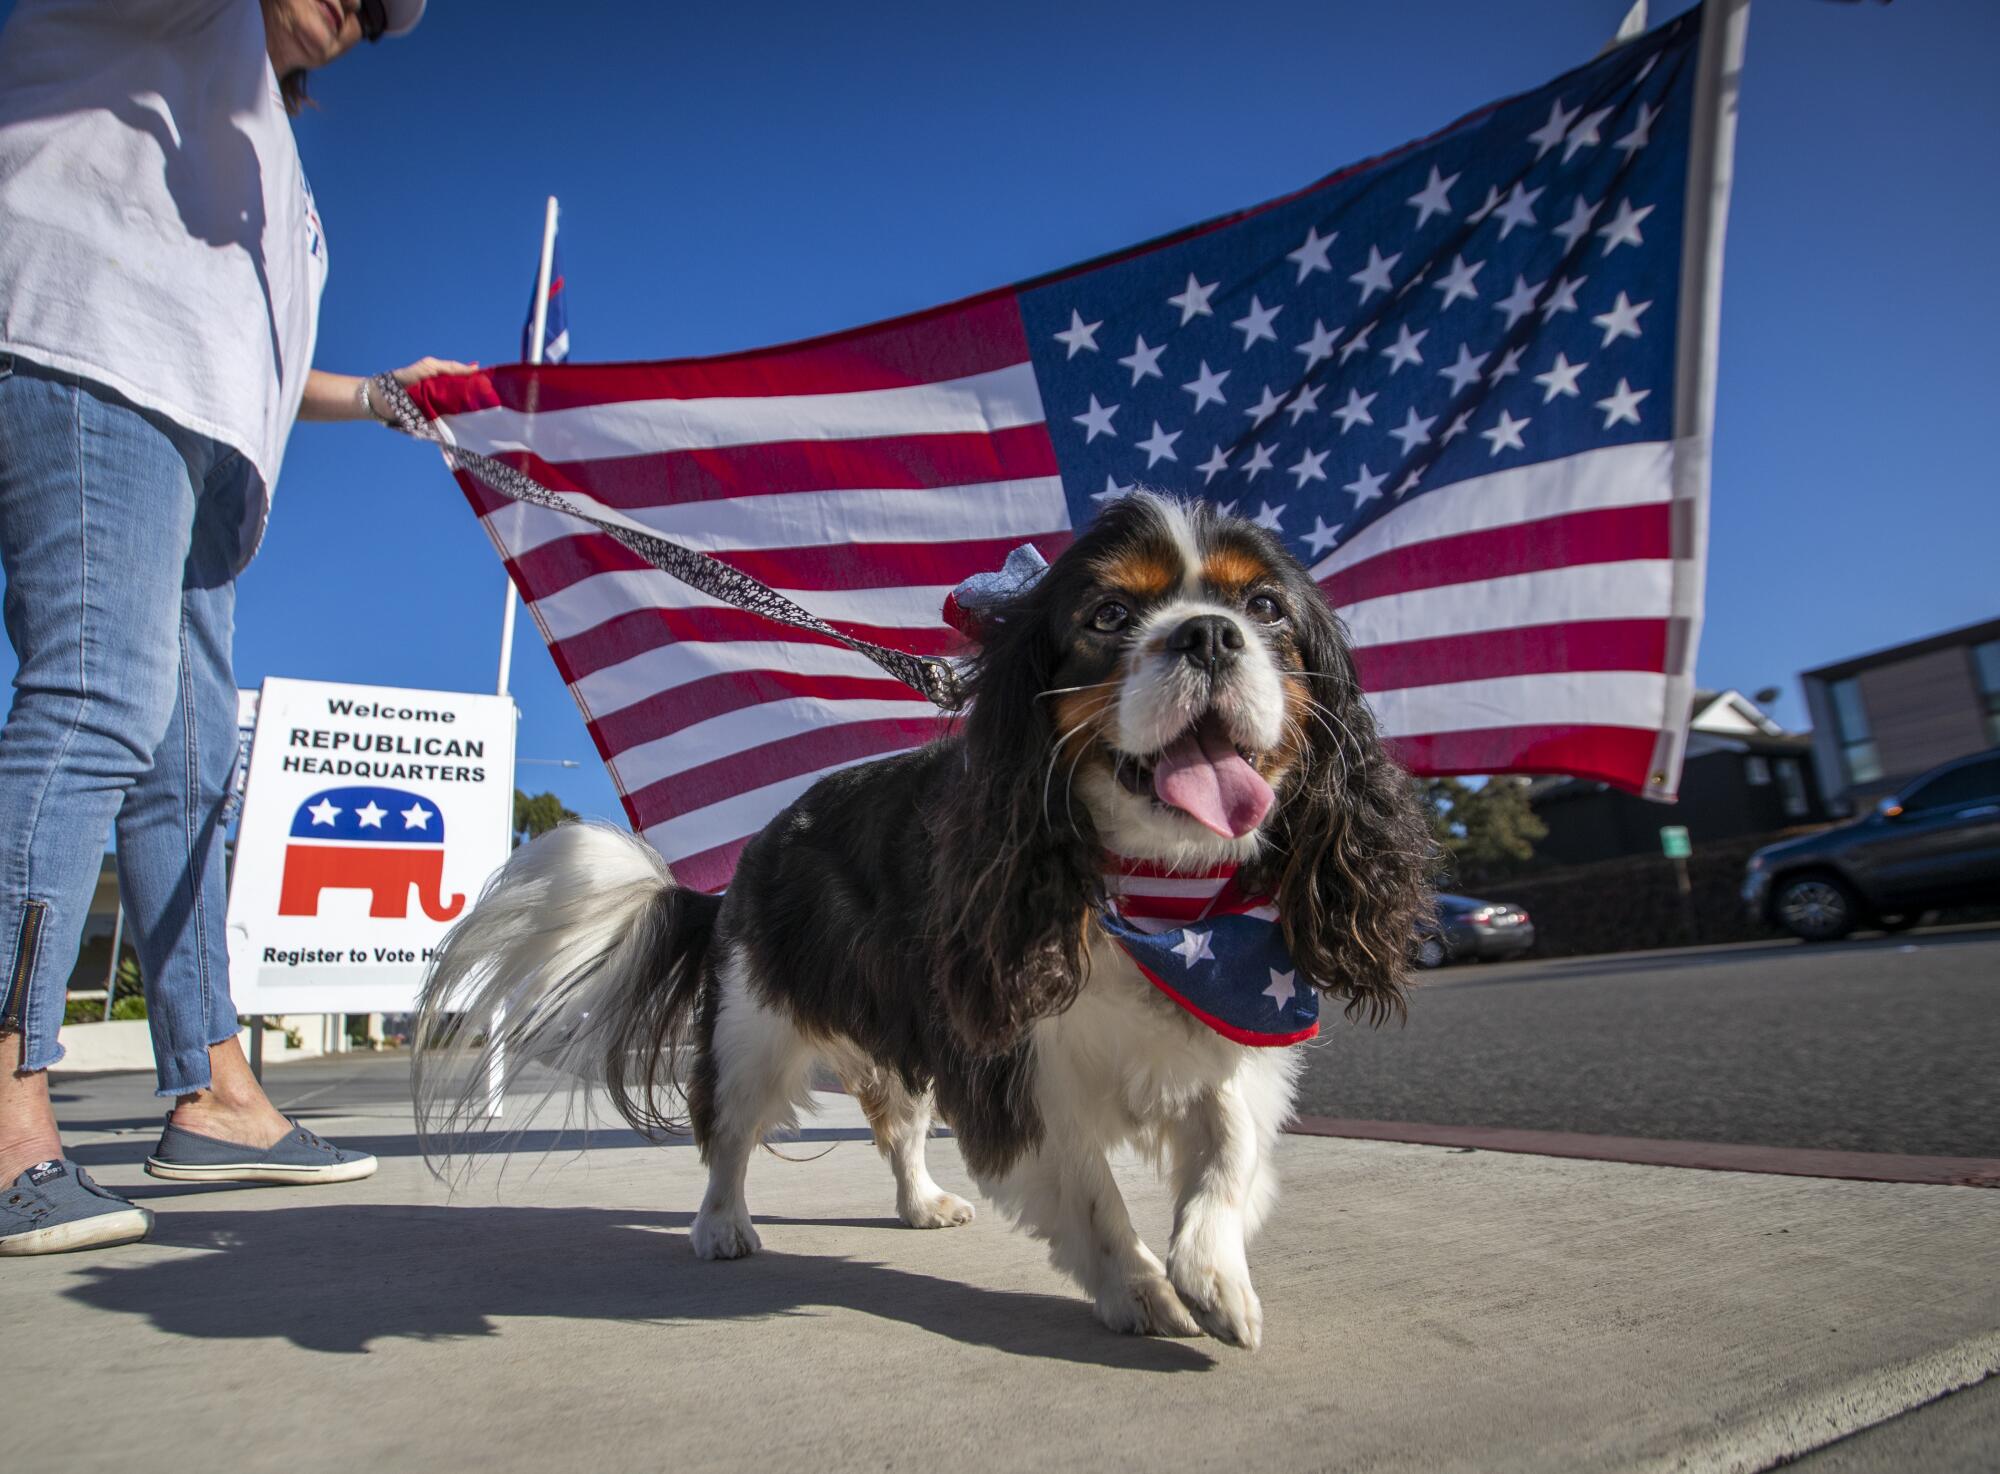 A woman and her dog, dressed in a patriotic scarf, cheer on passing motorists.